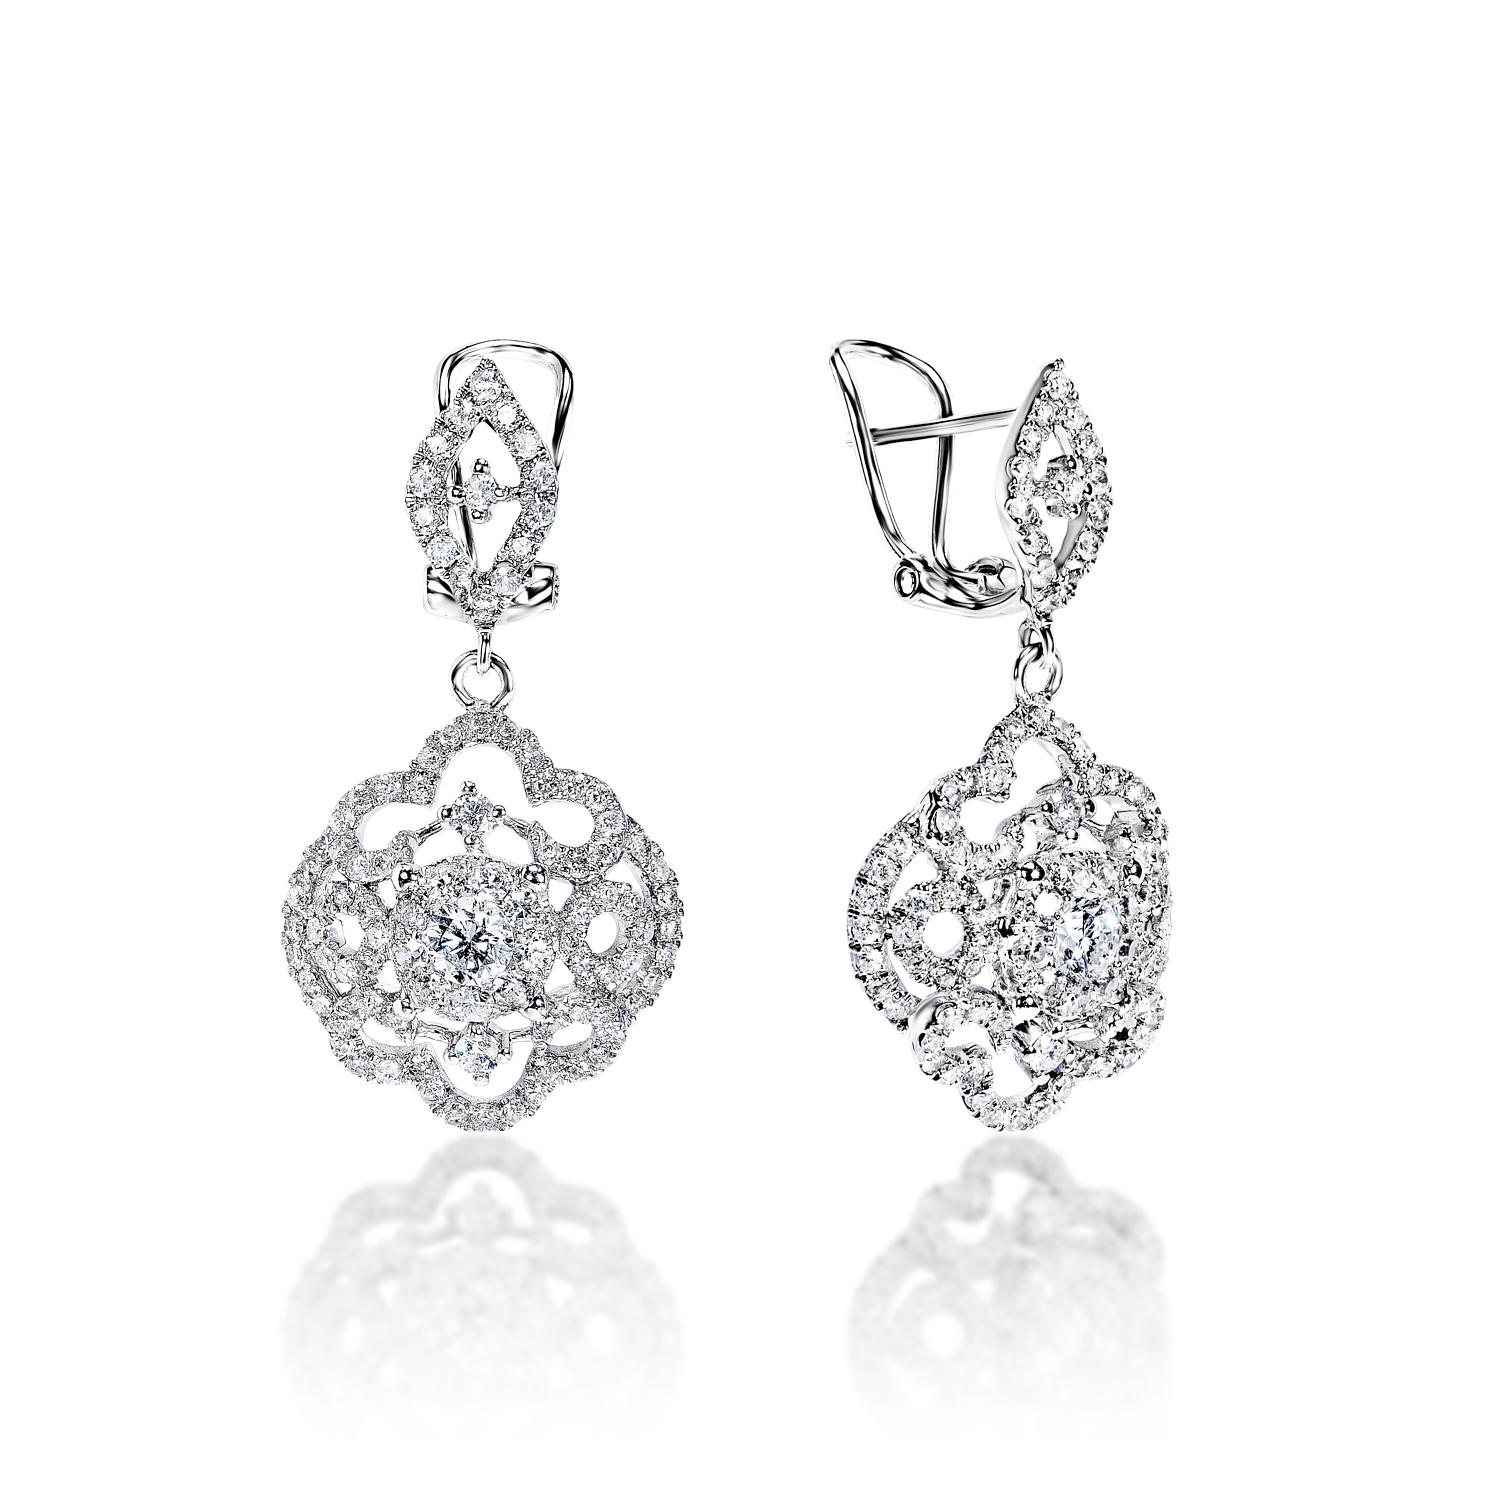 Round Cut 2 Carat Round Brilliant Diamond English Lock Earrings Certified For Sale